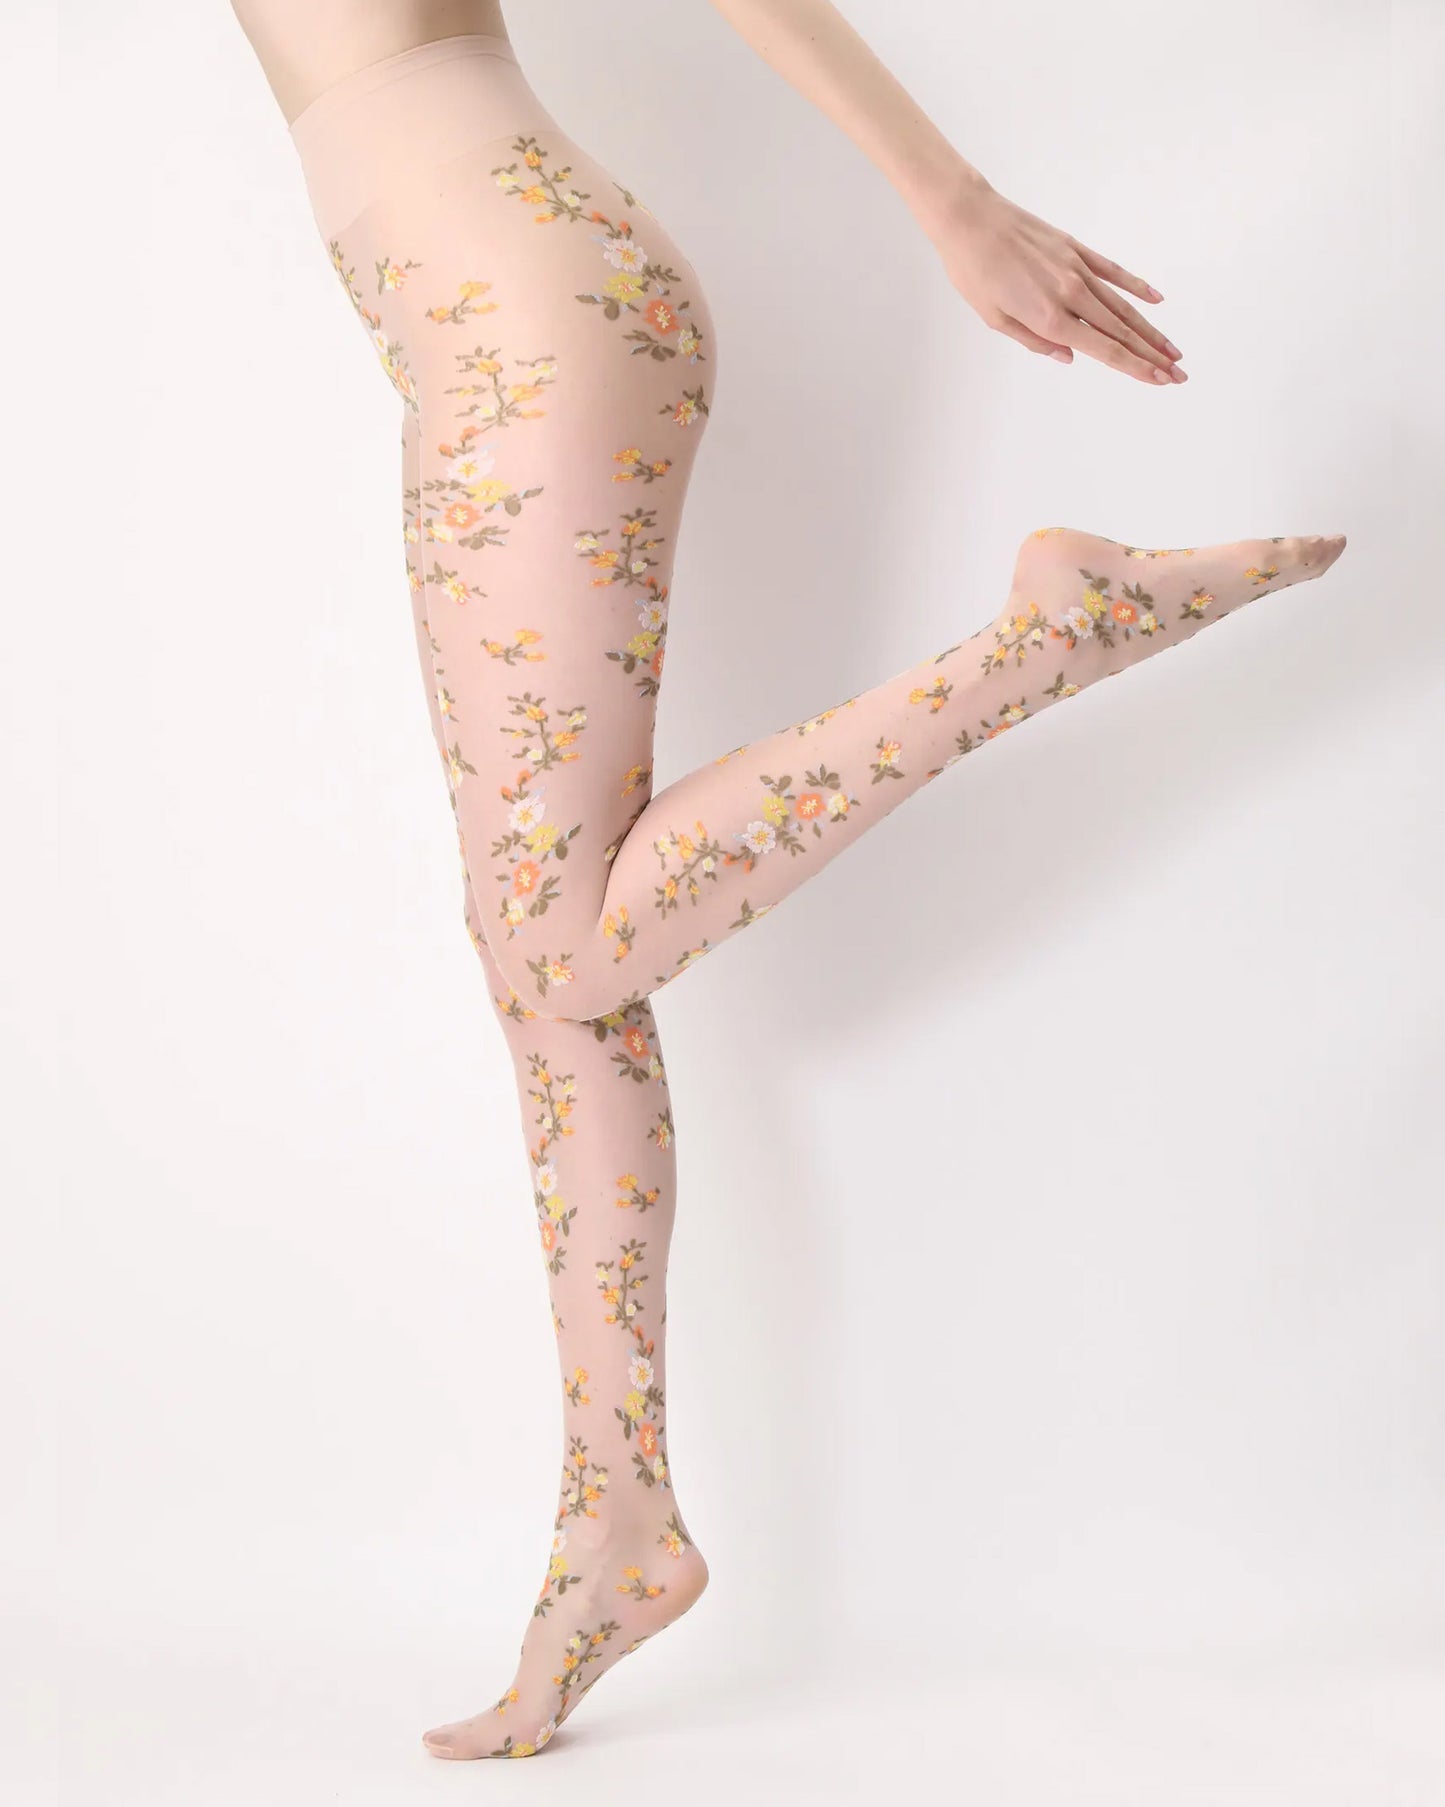 Oroblù Embroidery Collant - Sheer light nude fashion tights with a multicoloured woven floral pattern of orange, yellow, white and green, extra deep comfort waist band and gusset.